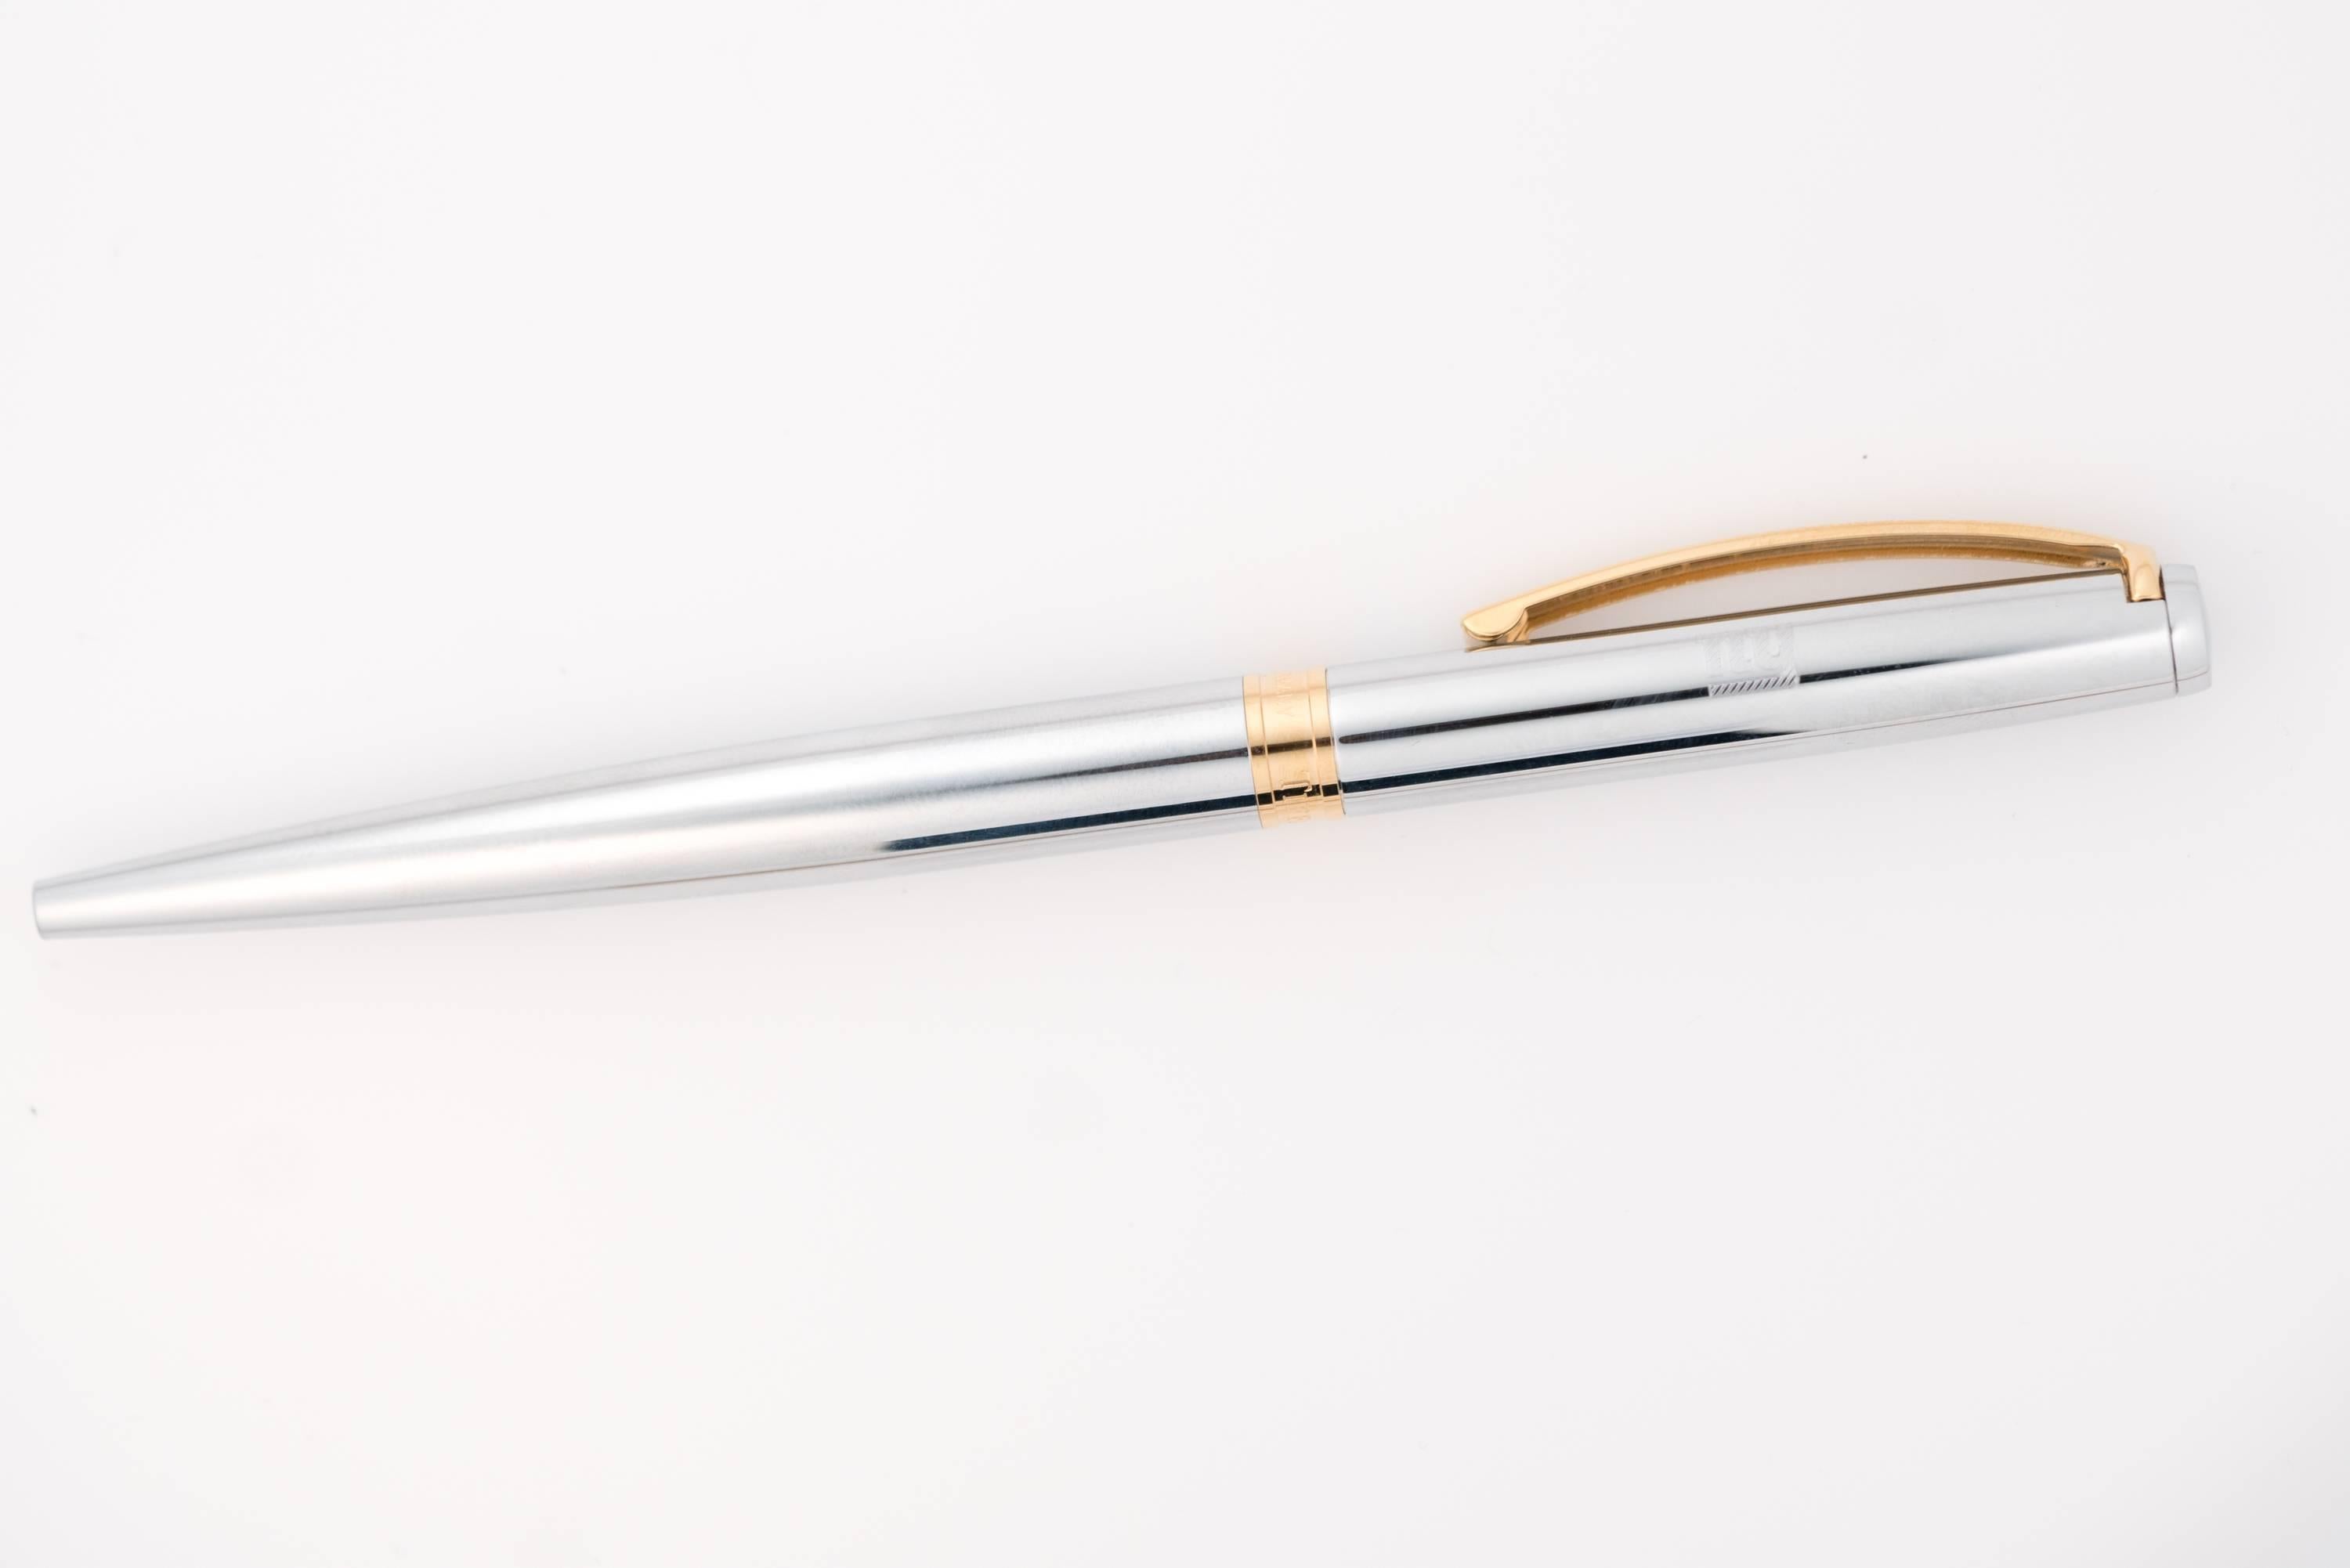 Commissioned by the New York Giants, this elegant silver tone ballpoint pen was made in Germany by Tiffany and Co. 
It features the NY Giants logo engraved on the upper half of the pen with the Tiffany and Co. logo engraved on the gold tone center